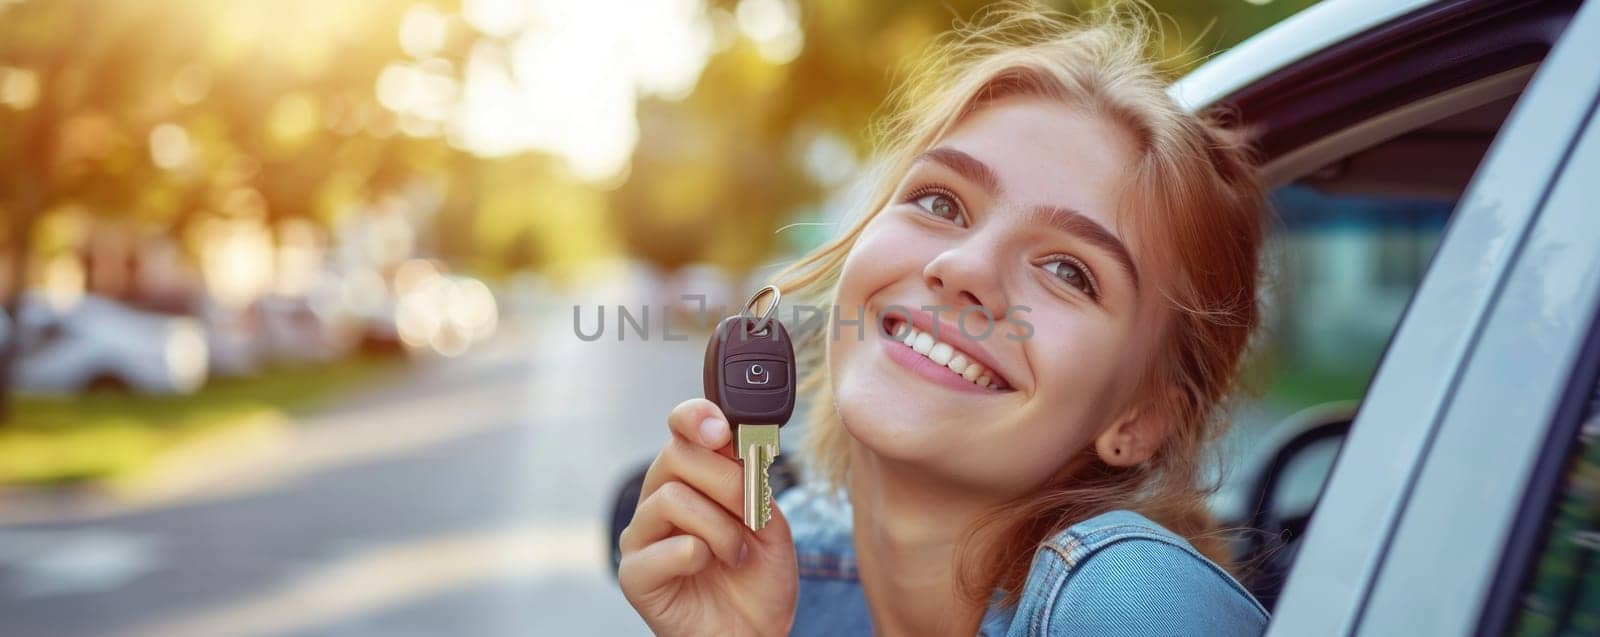 Smiling girl holds car keys in her hands, ready to hit the road for new adventures.